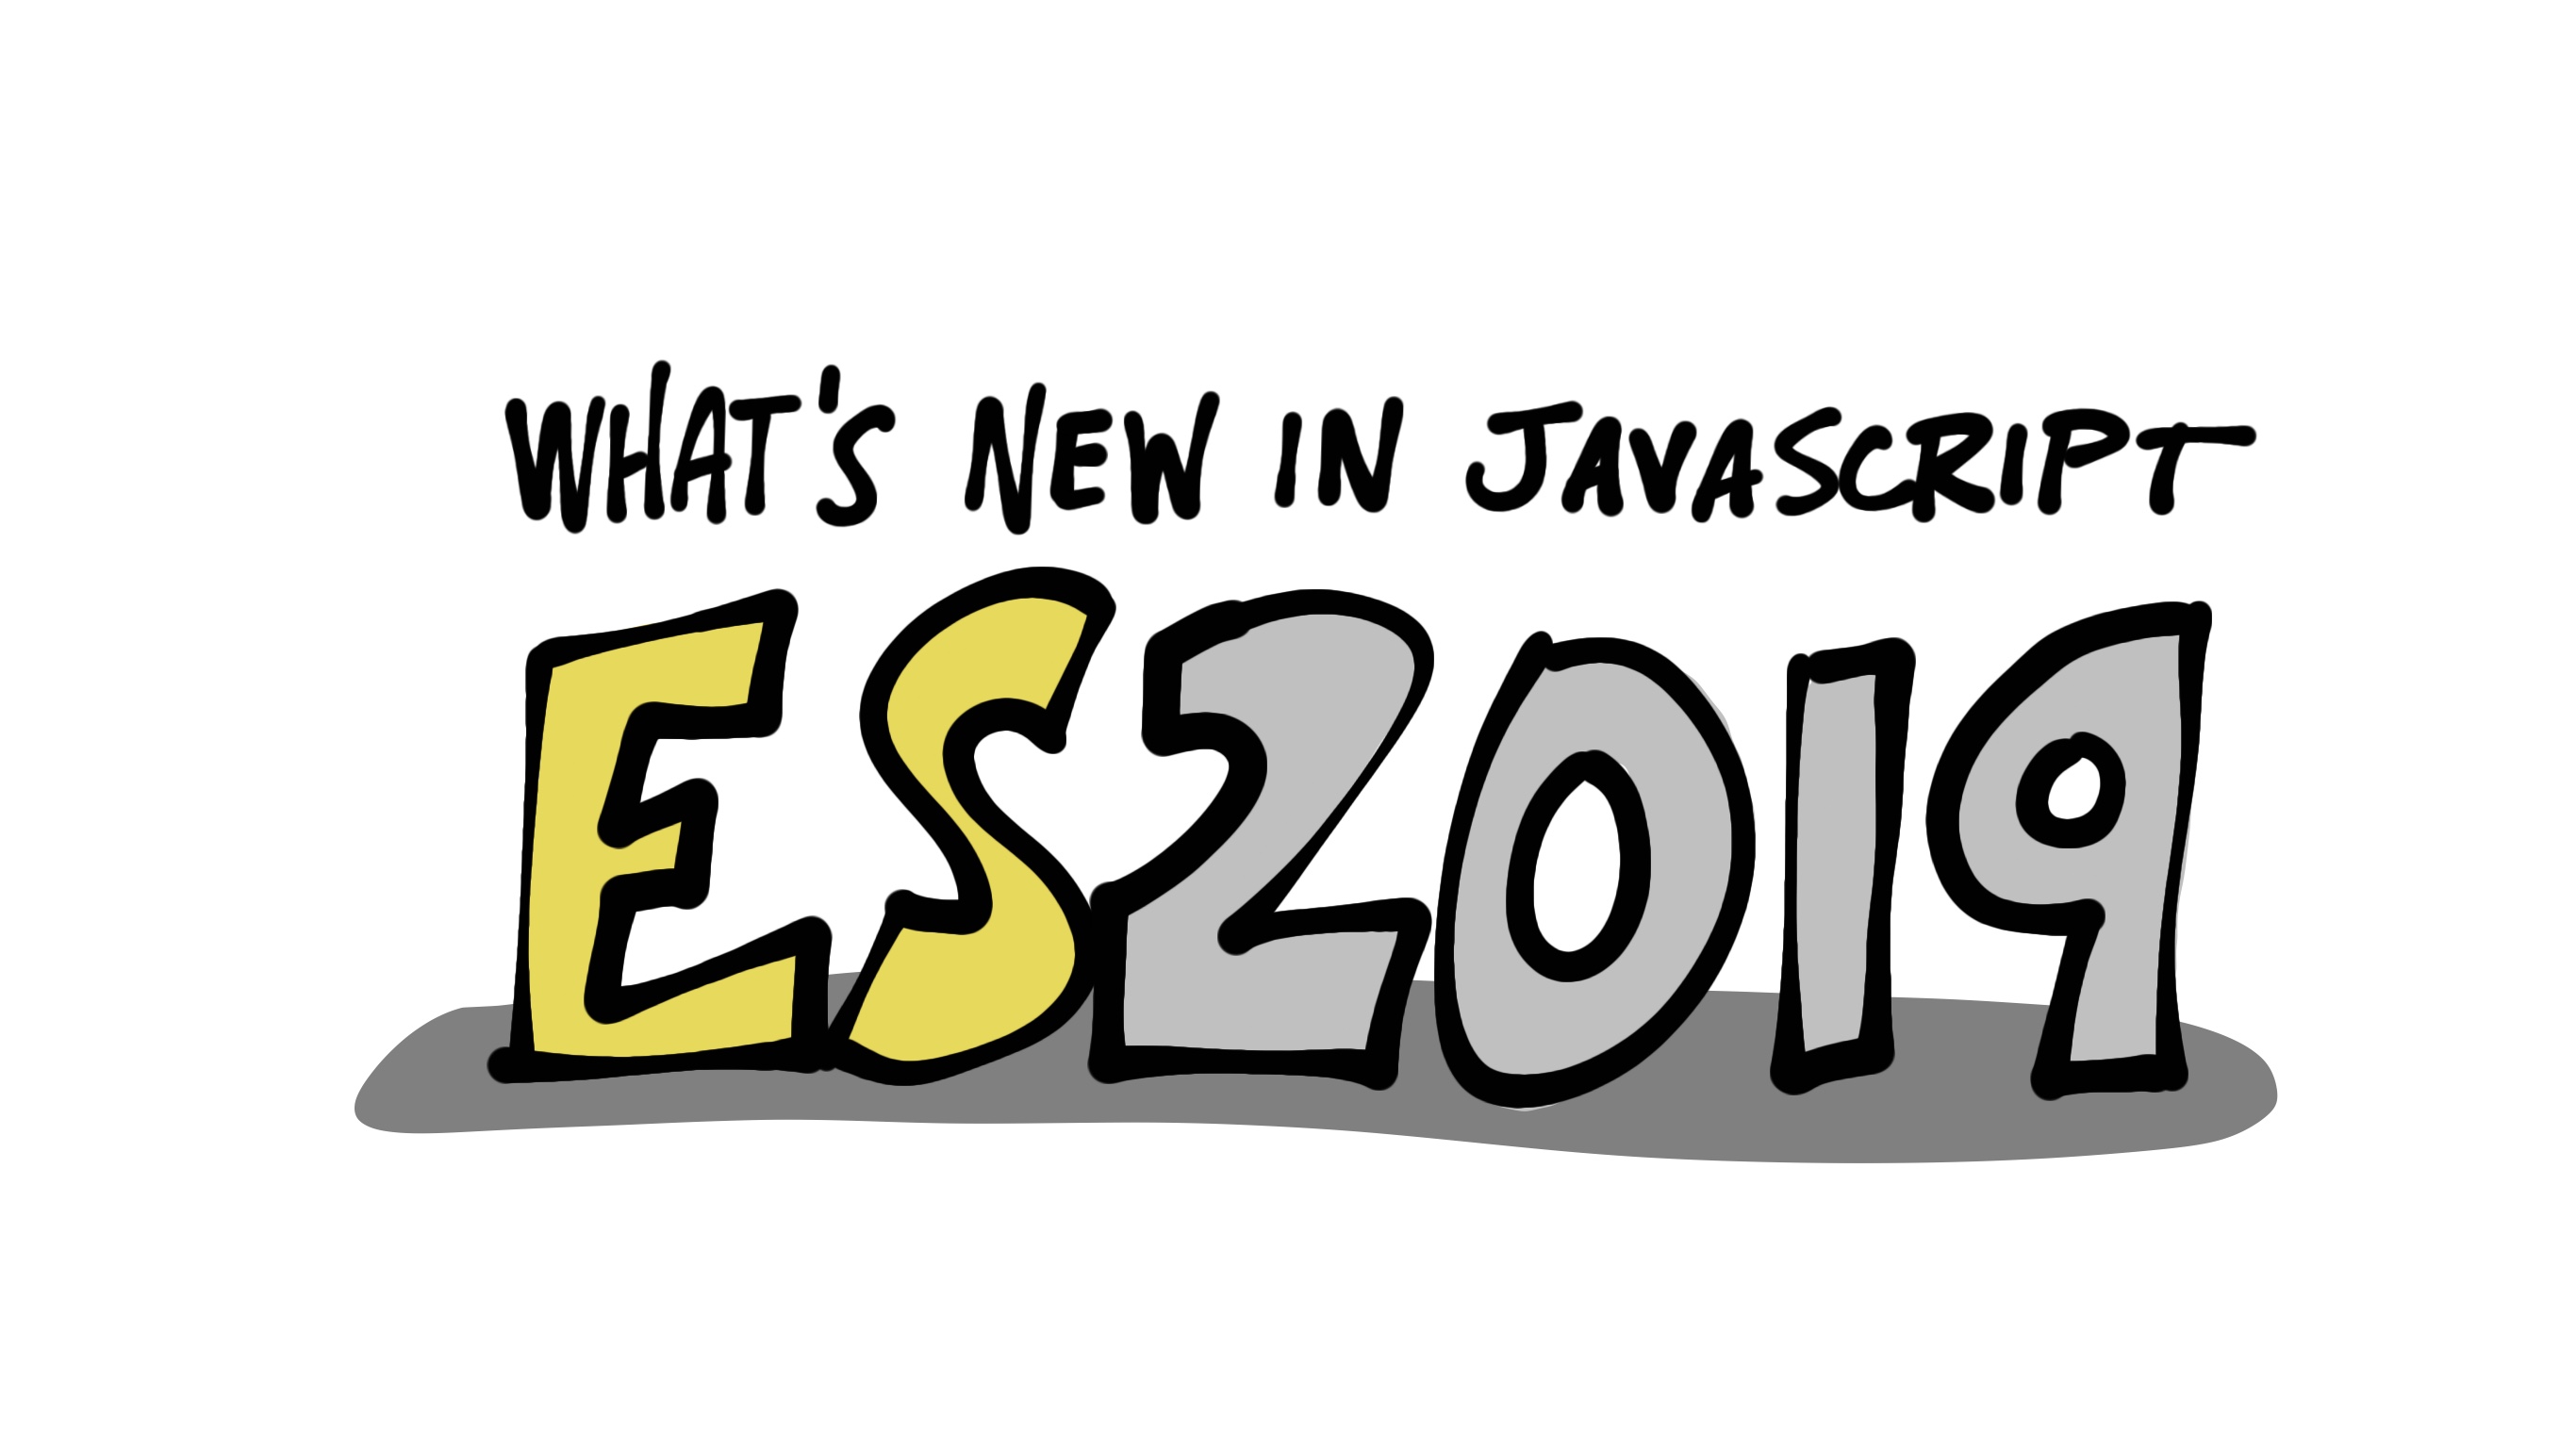 What's New in JavaScript for 2019